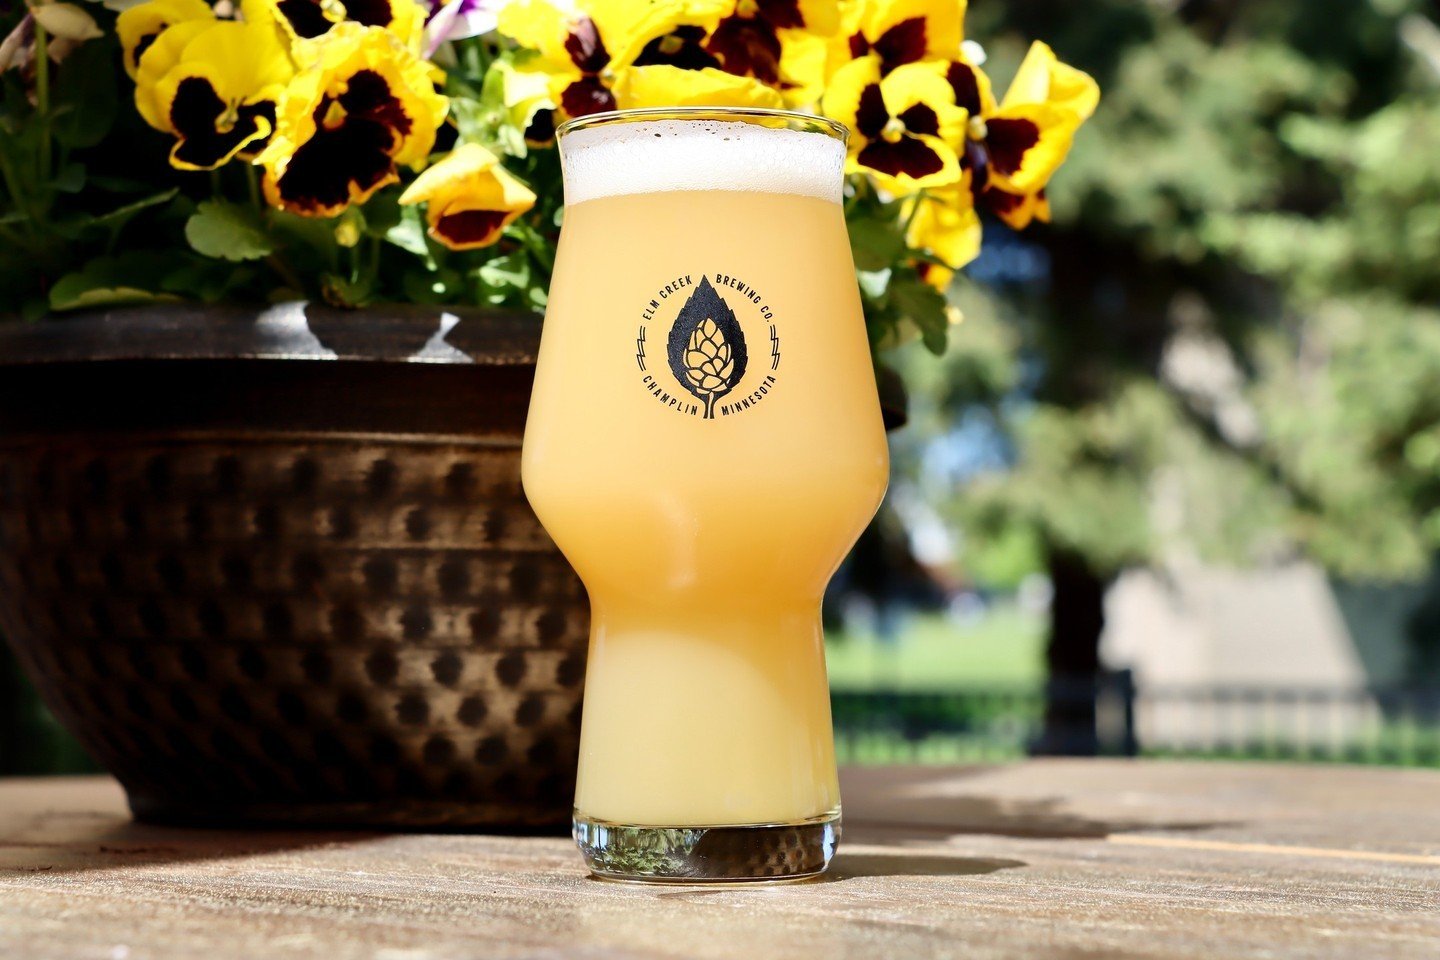 If you haven't noticed, it's for sure Patio Szn ☀️⁠
⁠
We took our house hazy grain bill and the cool folks at Northern Taphouse said- hey, what if we made a non-milkshake fruited hazy? Sounded like a great plan so we teamed up and added Pineapple and